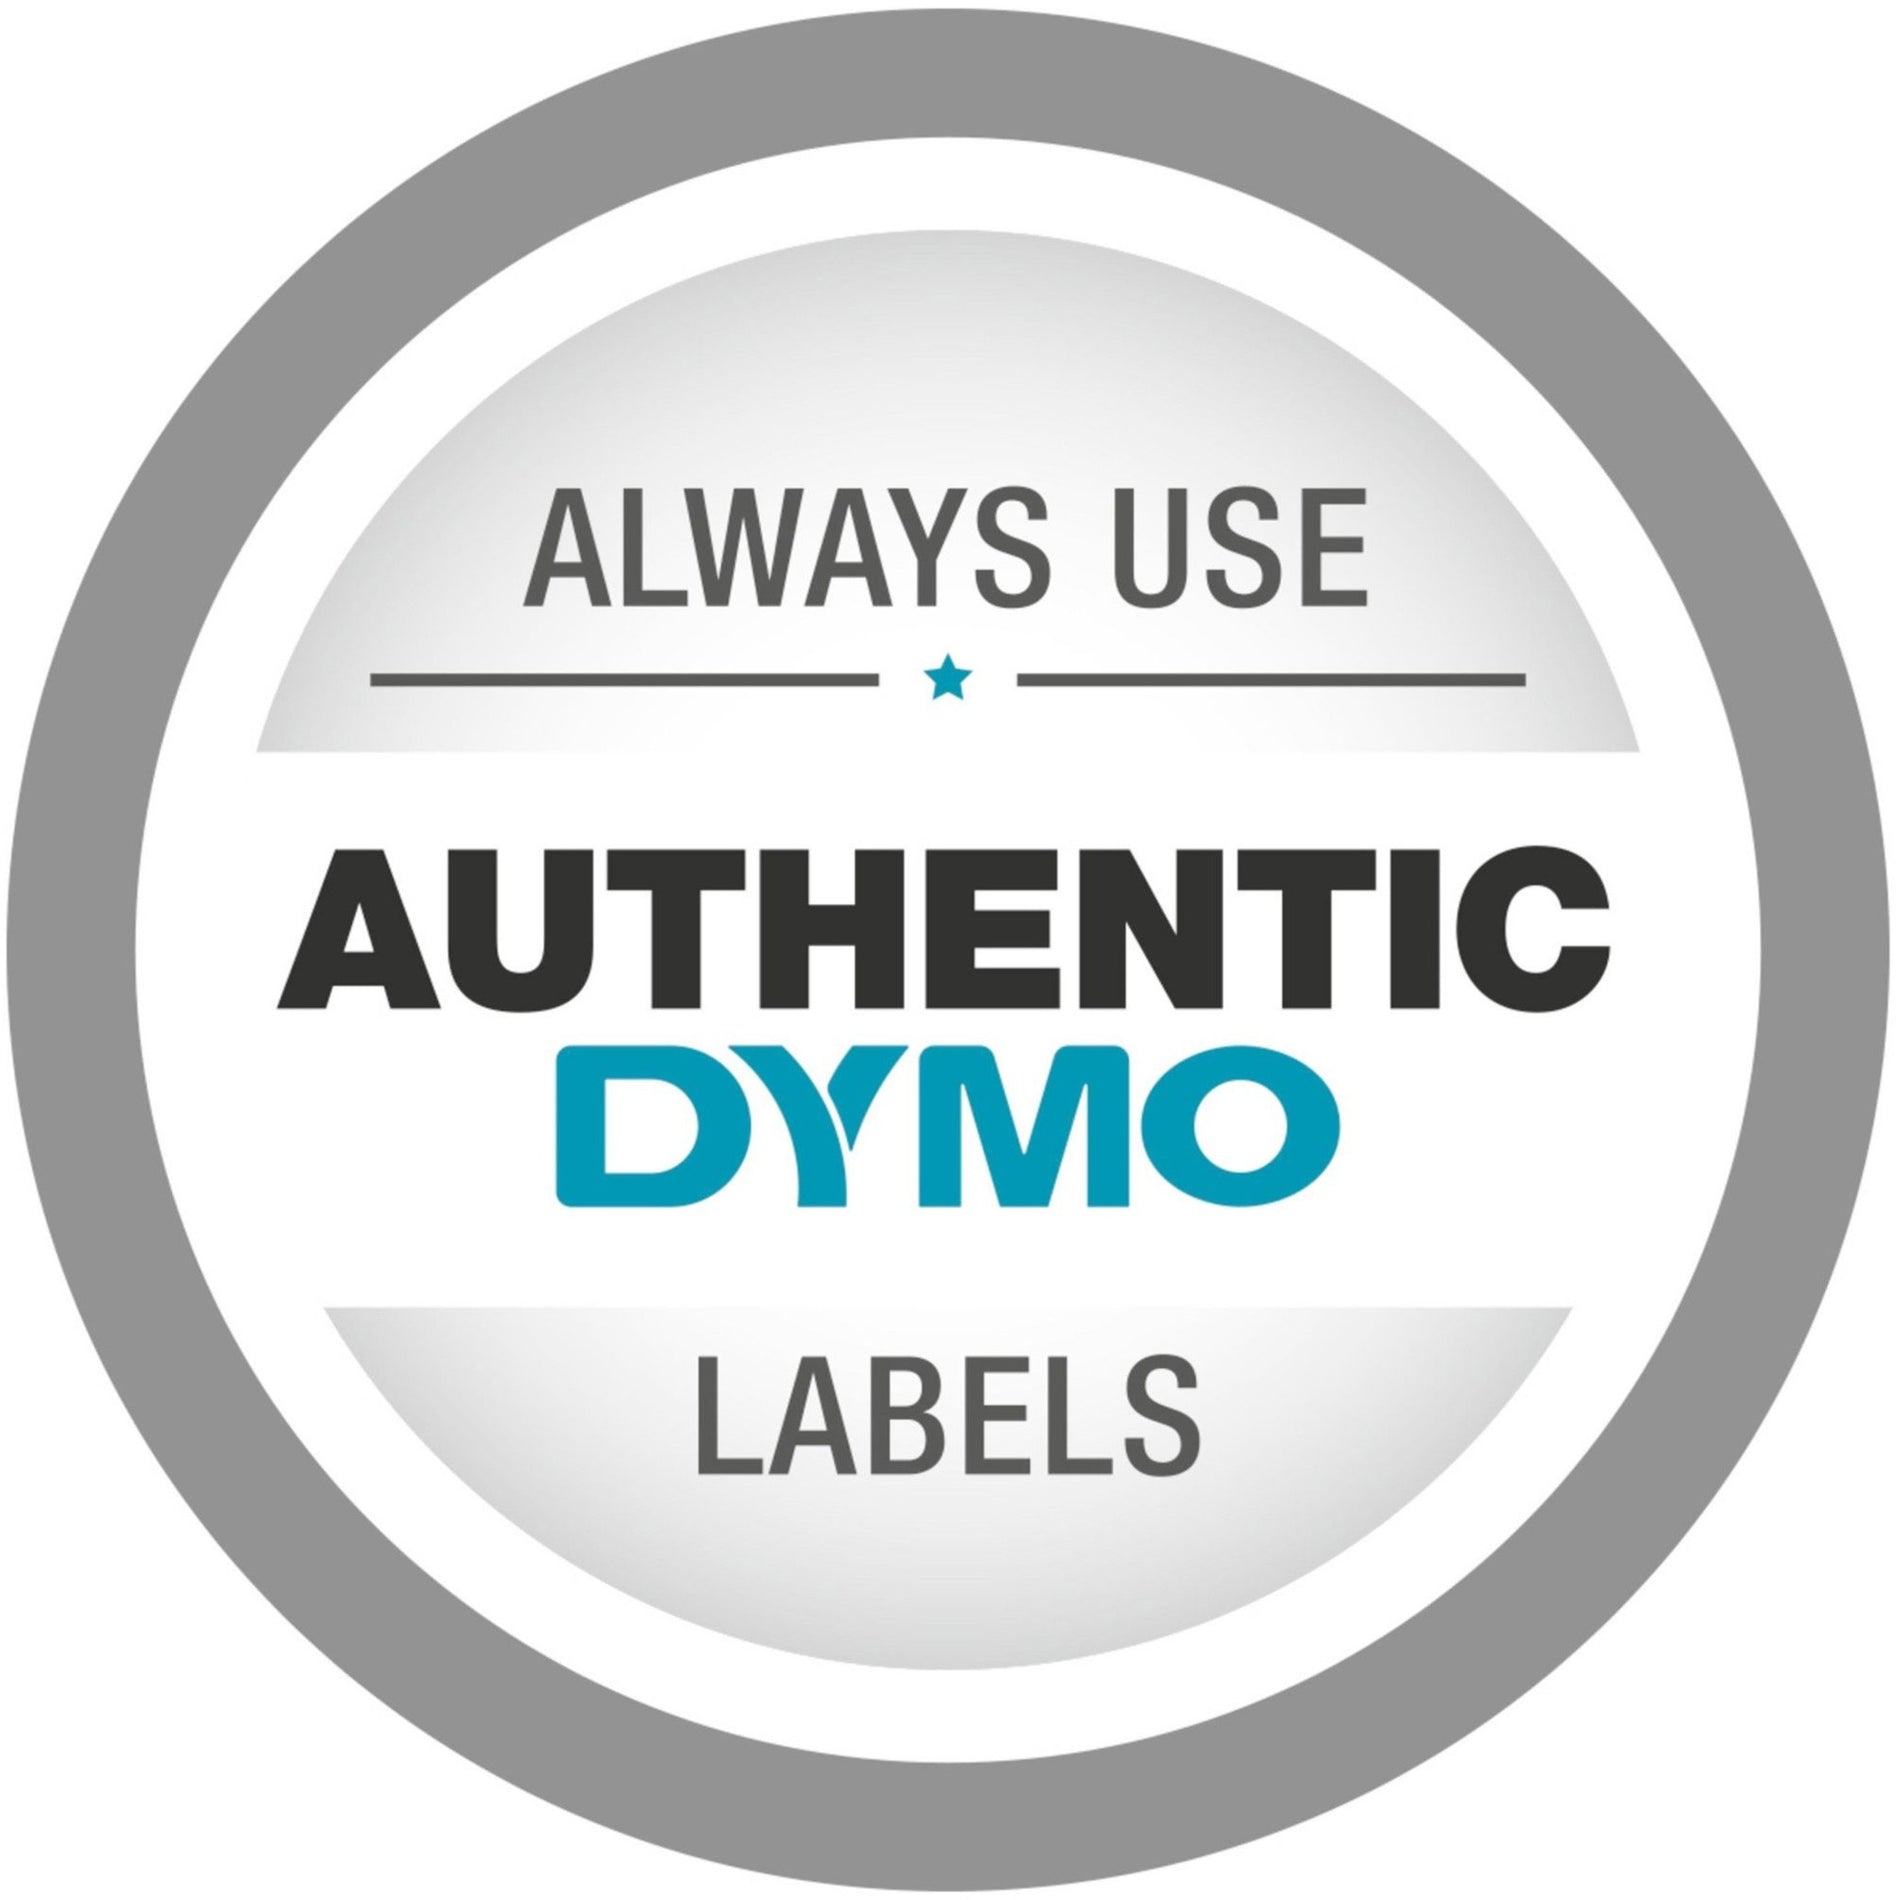 Dymo 30334 LW Multi-Purpose Labels, Printable, Removable Adhesive, 2 1/4" x 1 1/4", 1000 Labels